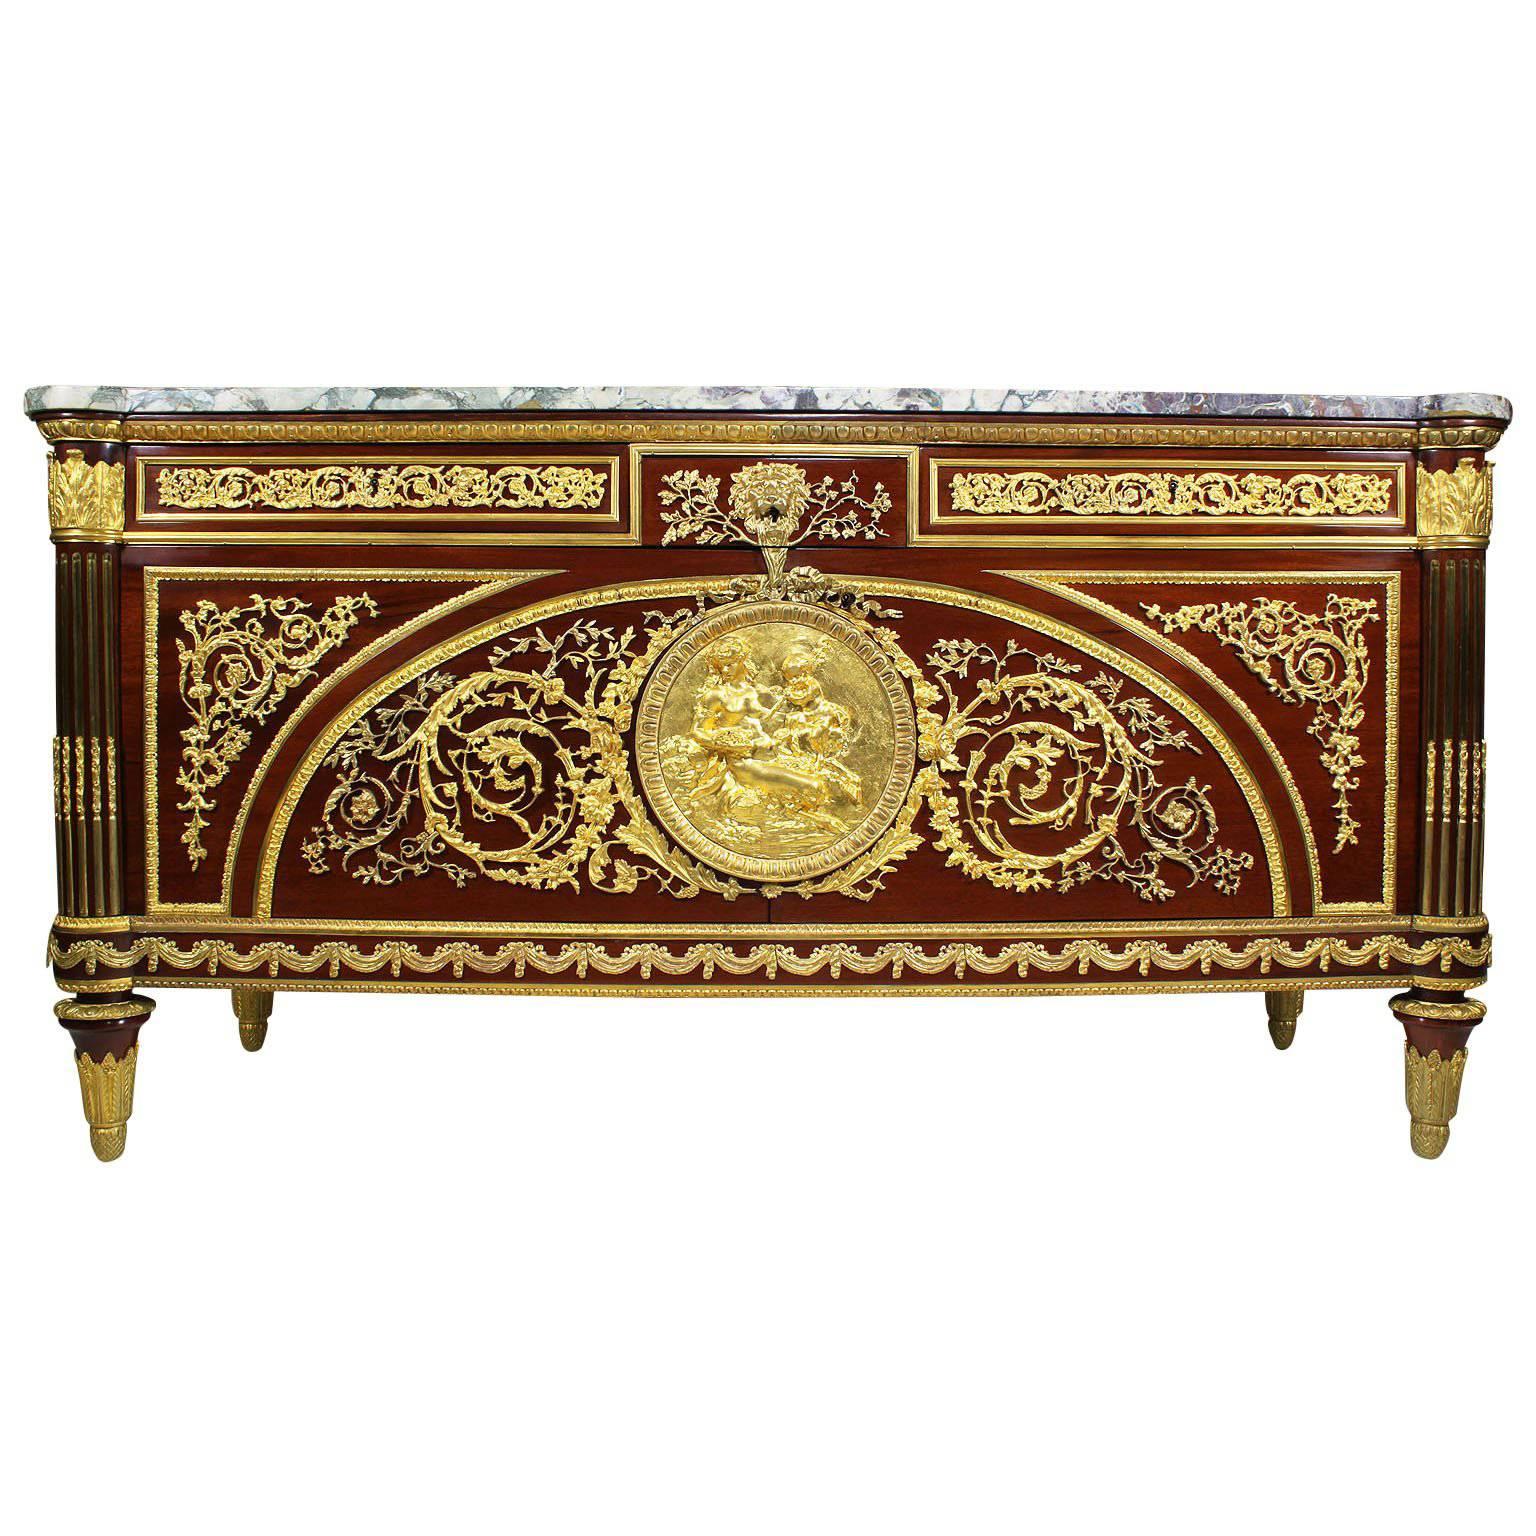 French 19th-20th Century Louis XVI Style Mahogany Ormolu-Mounted Commode For Sale